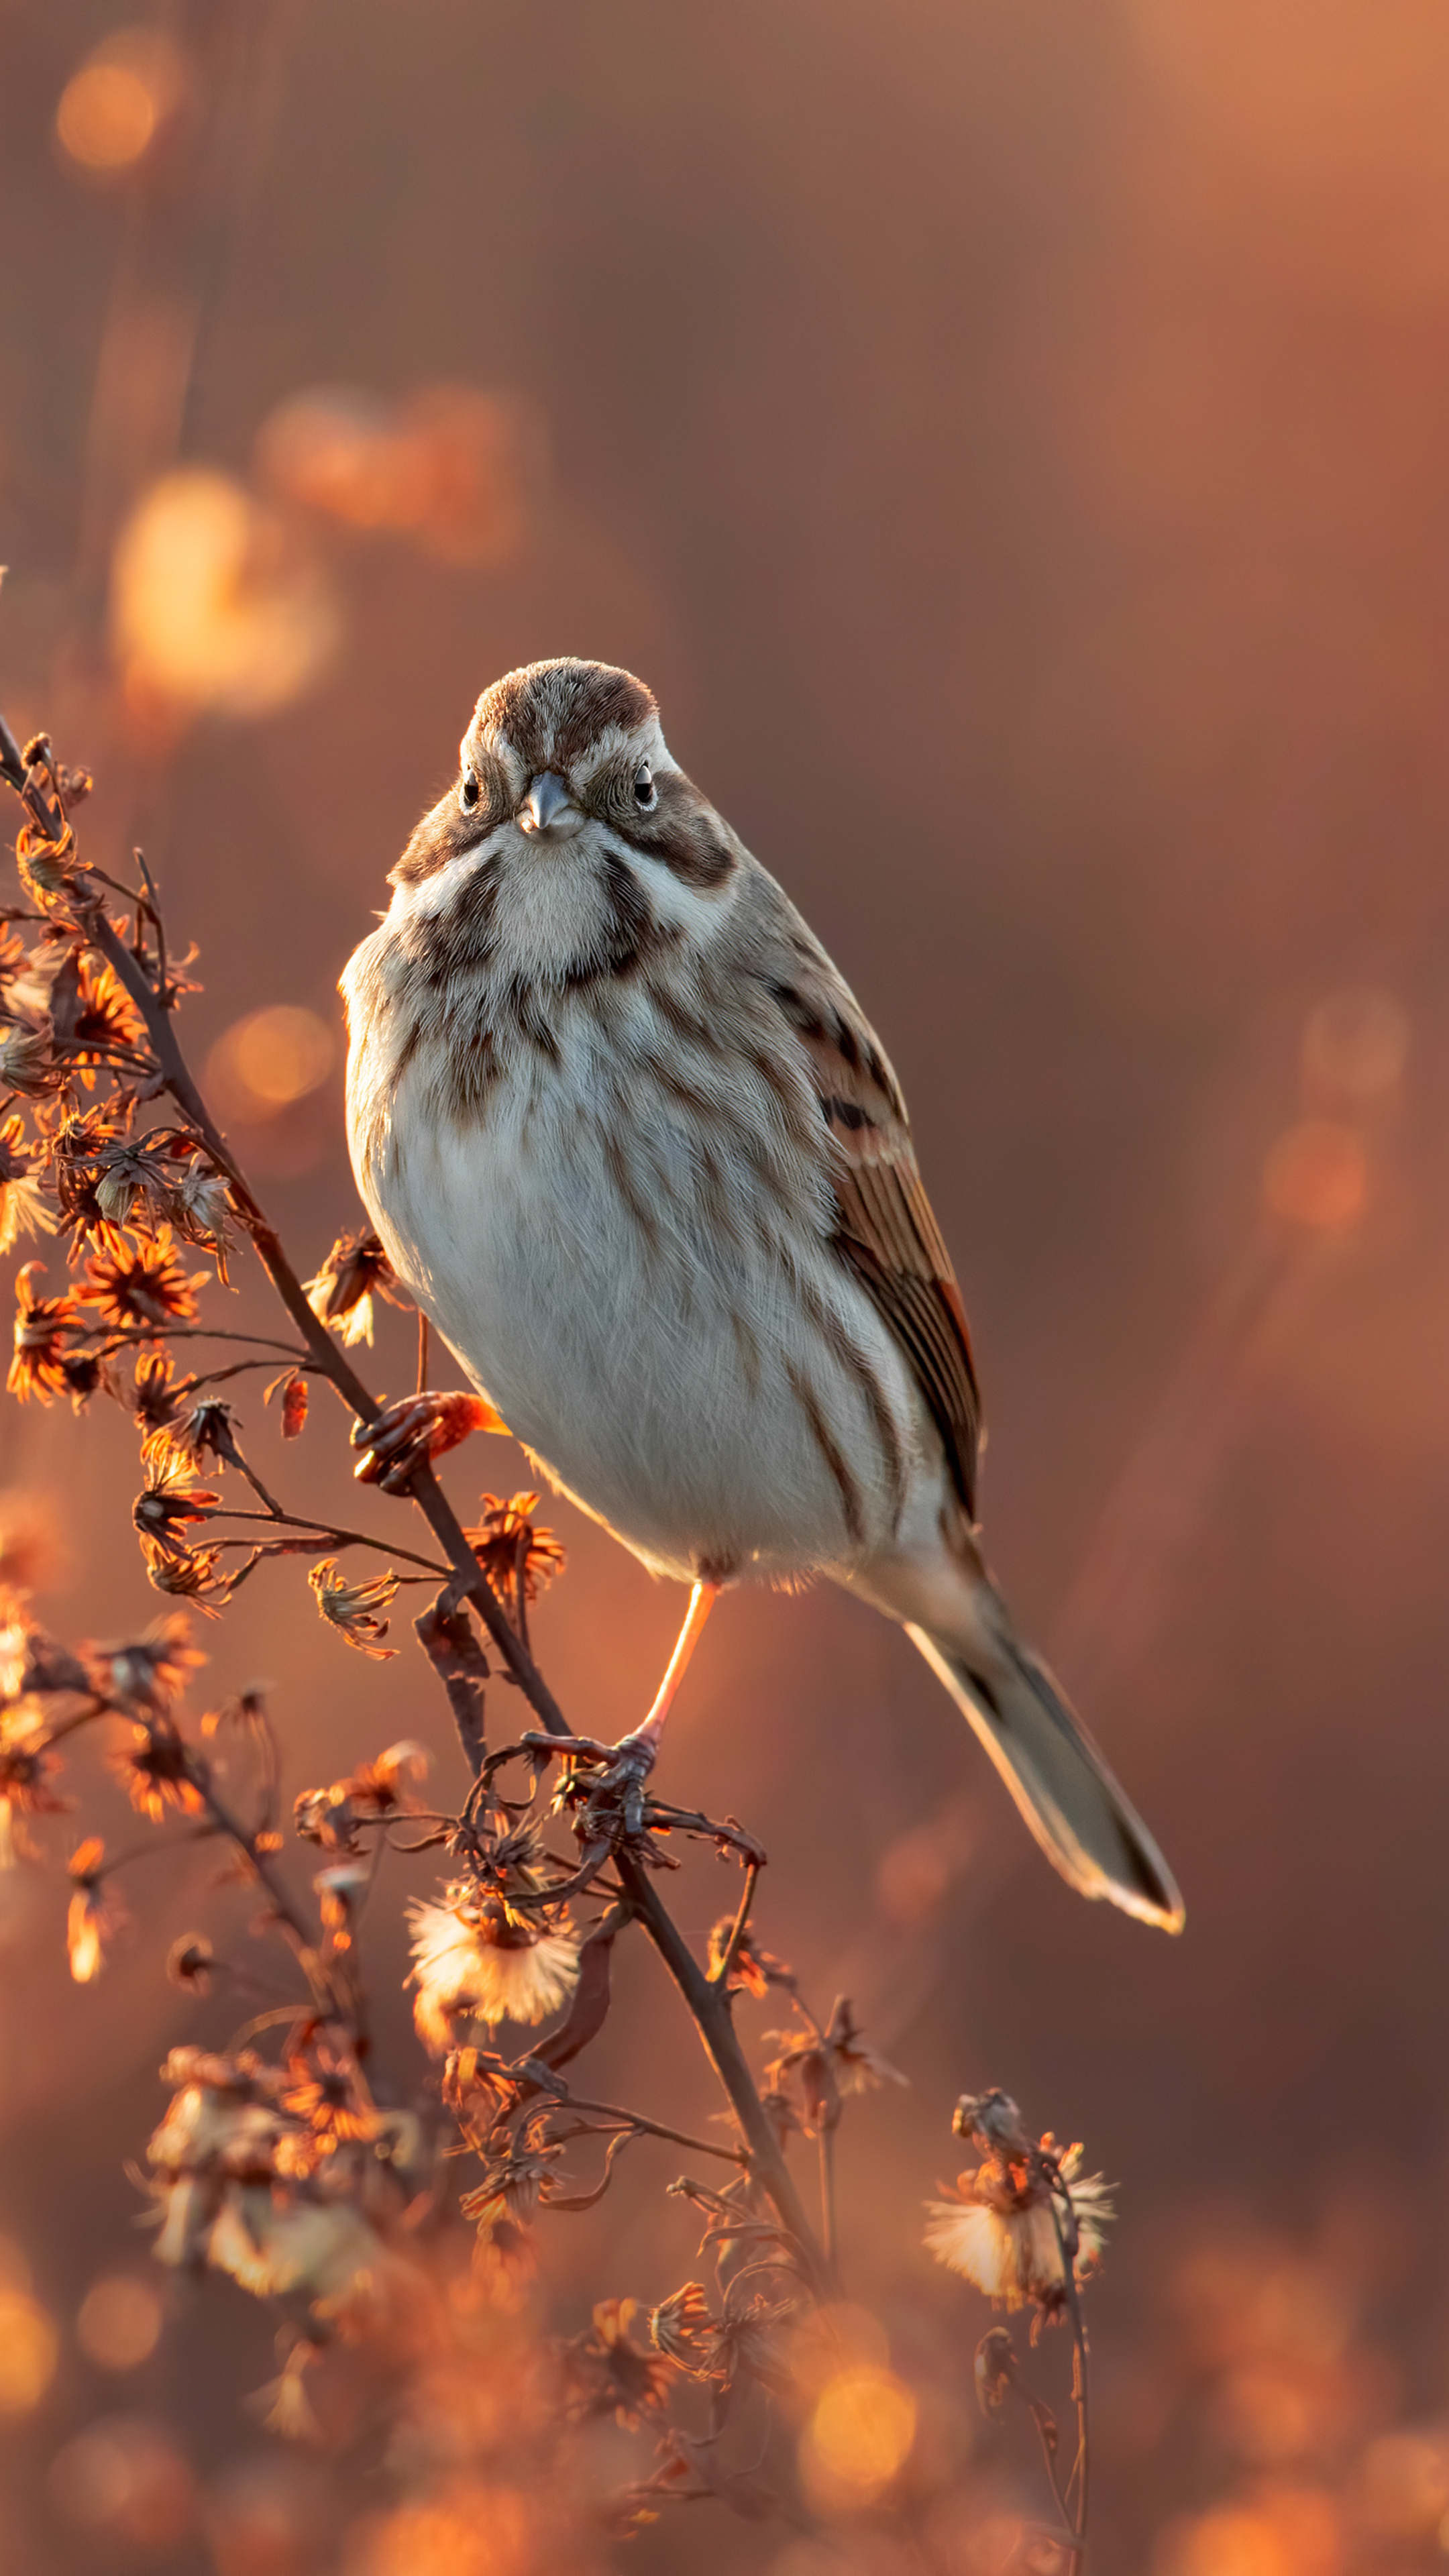 Sparrow on branch, Serene bird, Nature photography, Mobile wallpaper, 2160x3840 4K Phone